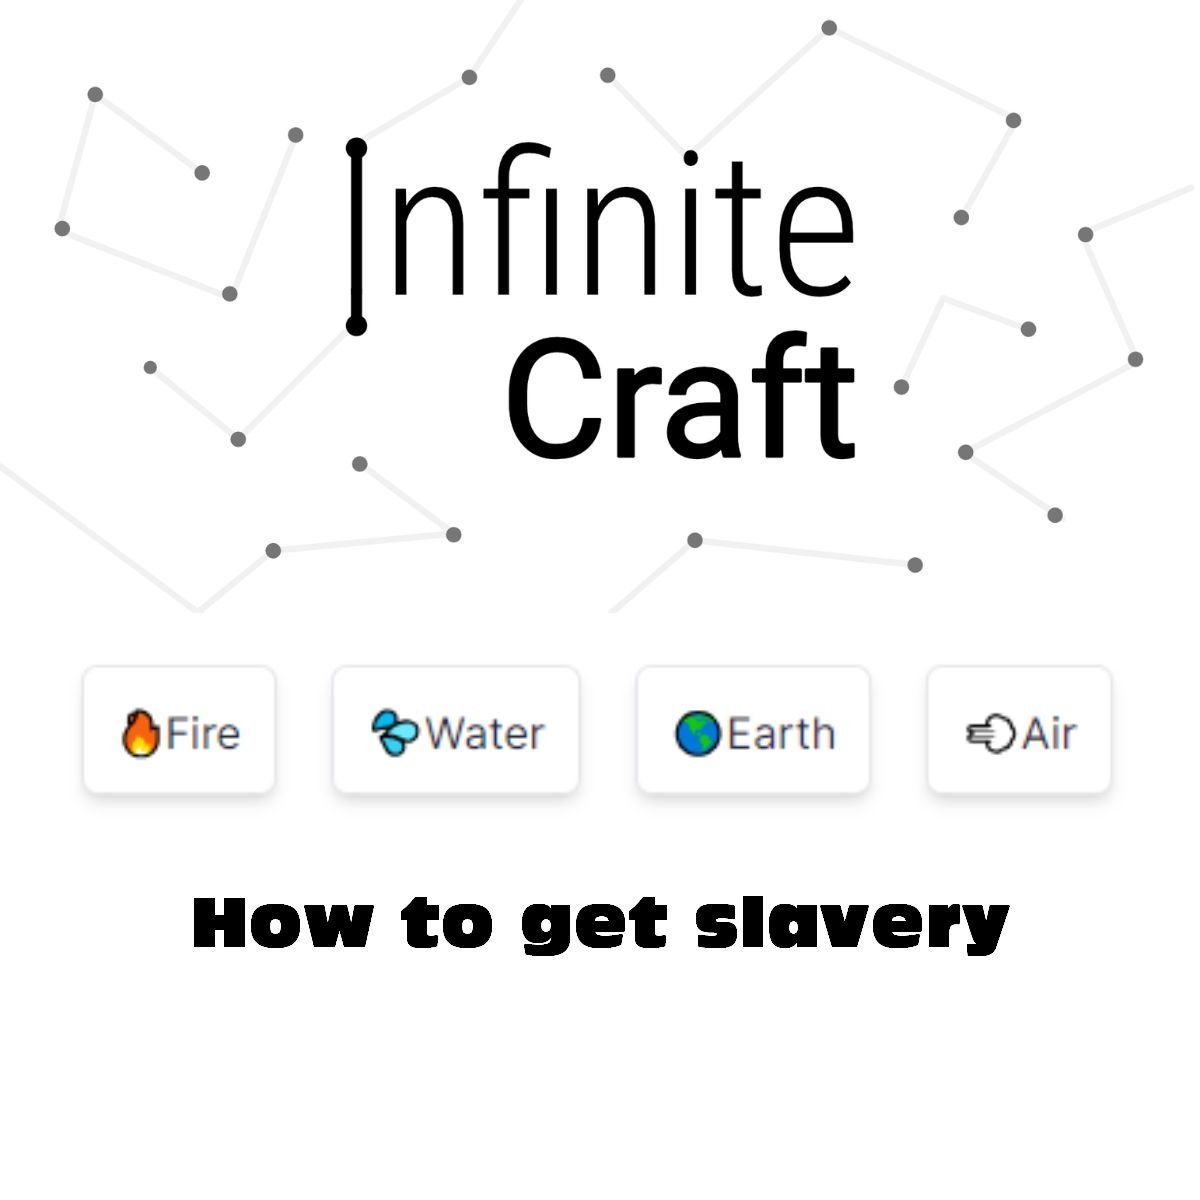 how to get slavery in infinite craft